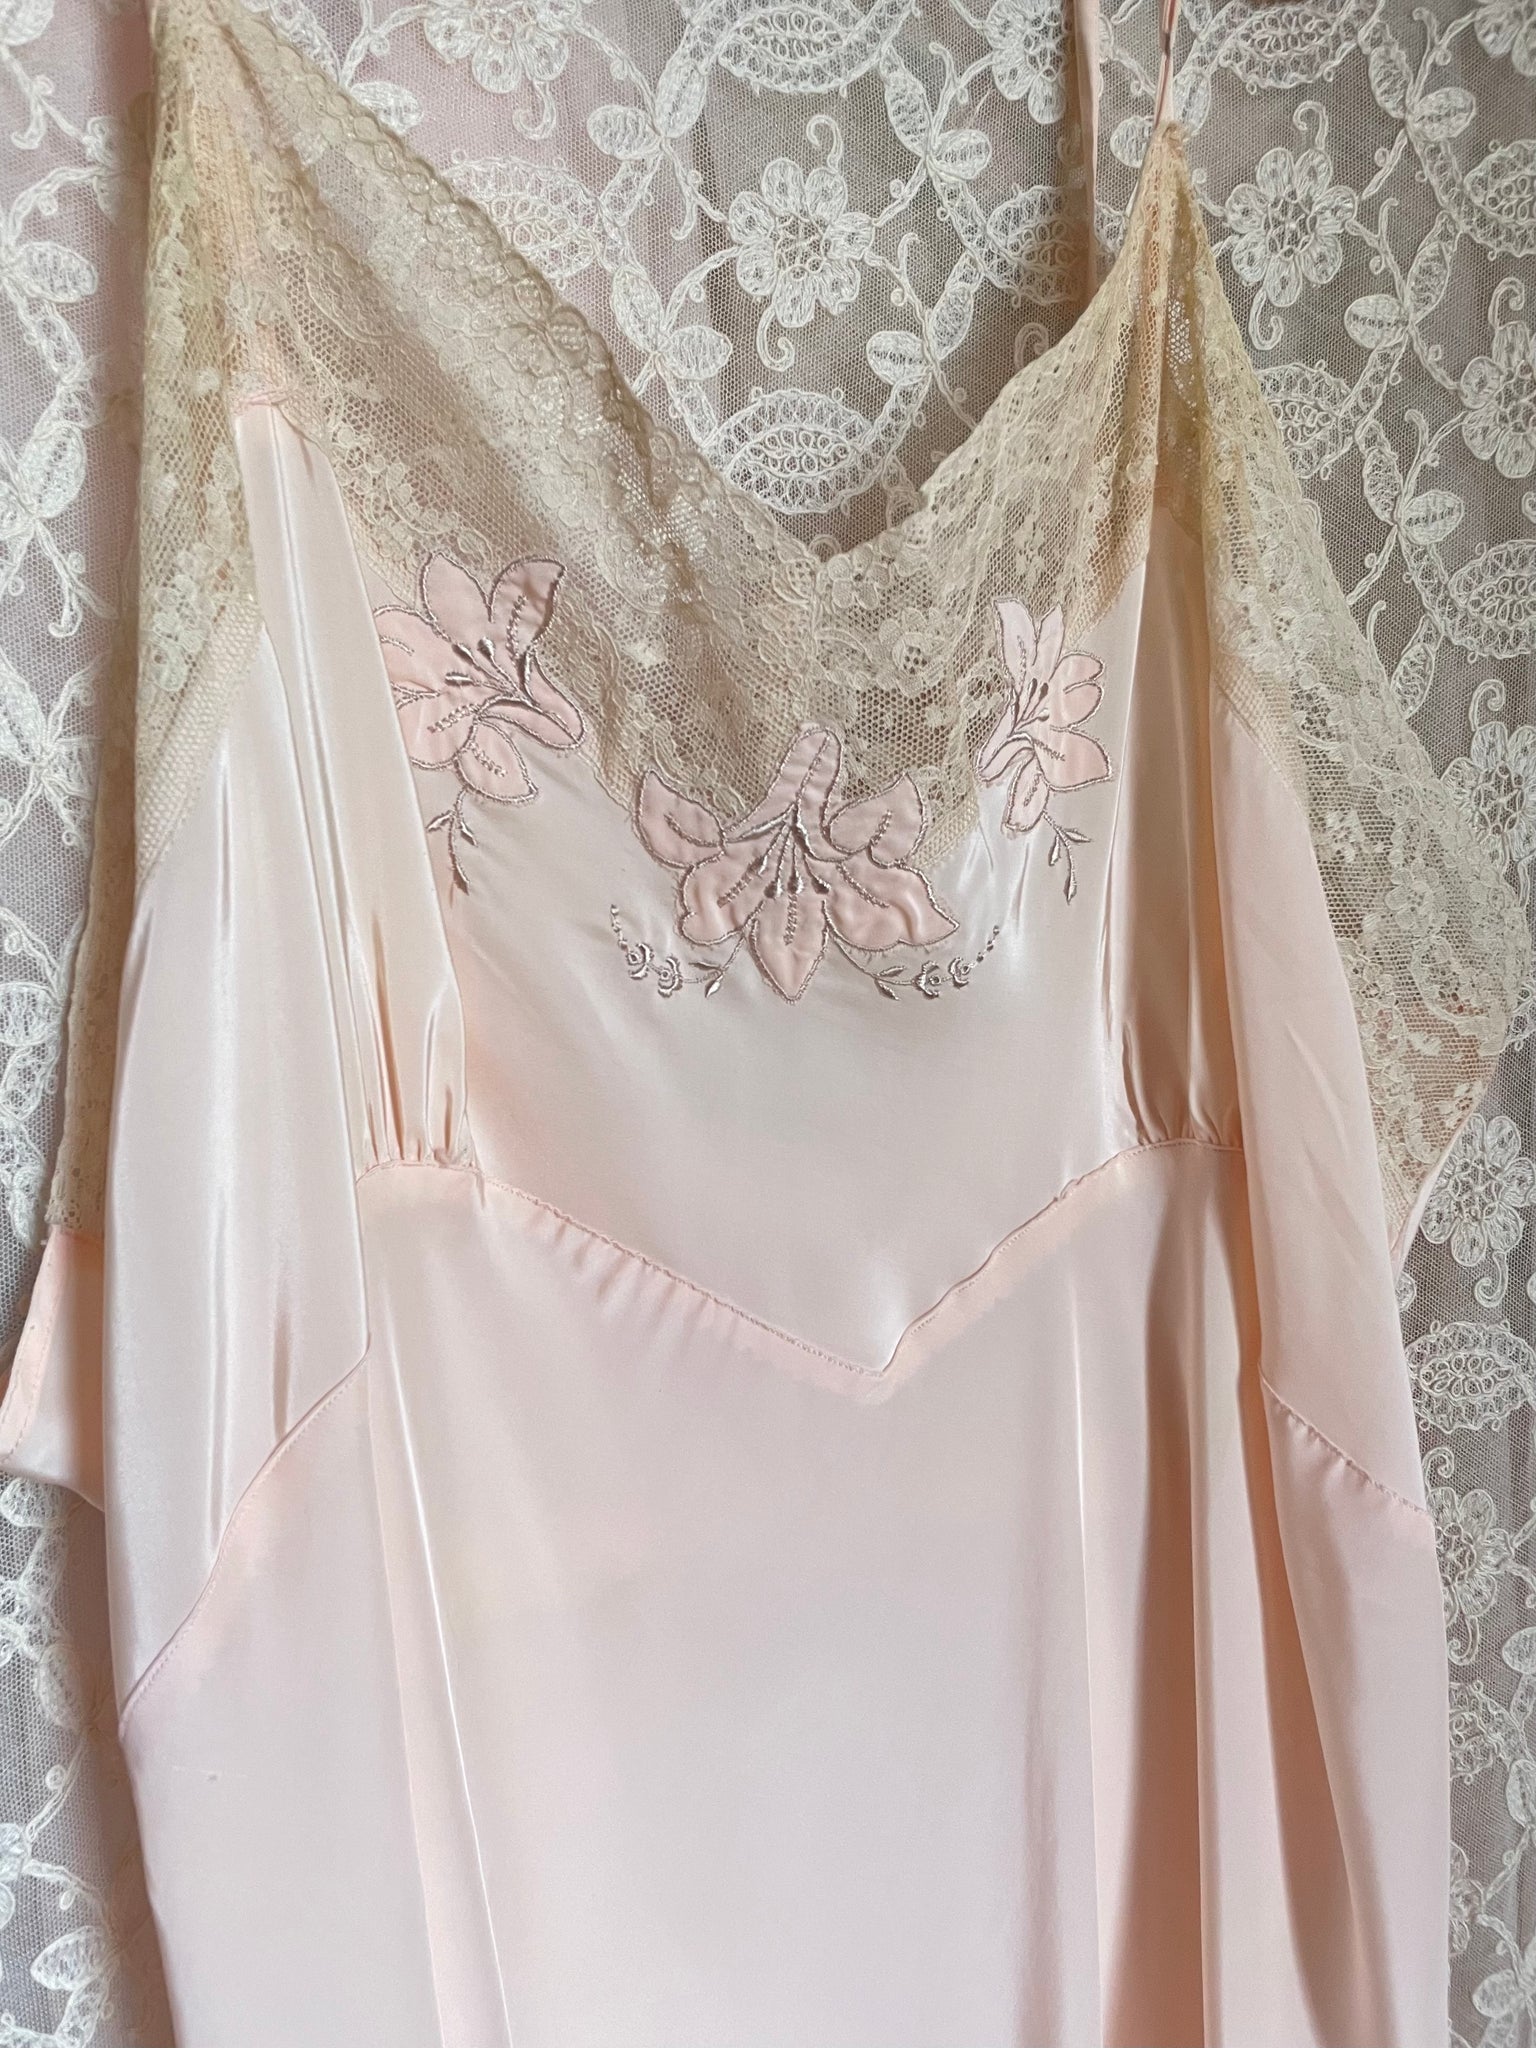 1950s Pale Blush Pink Rayon Slip Dress Lace Floral Embroidery